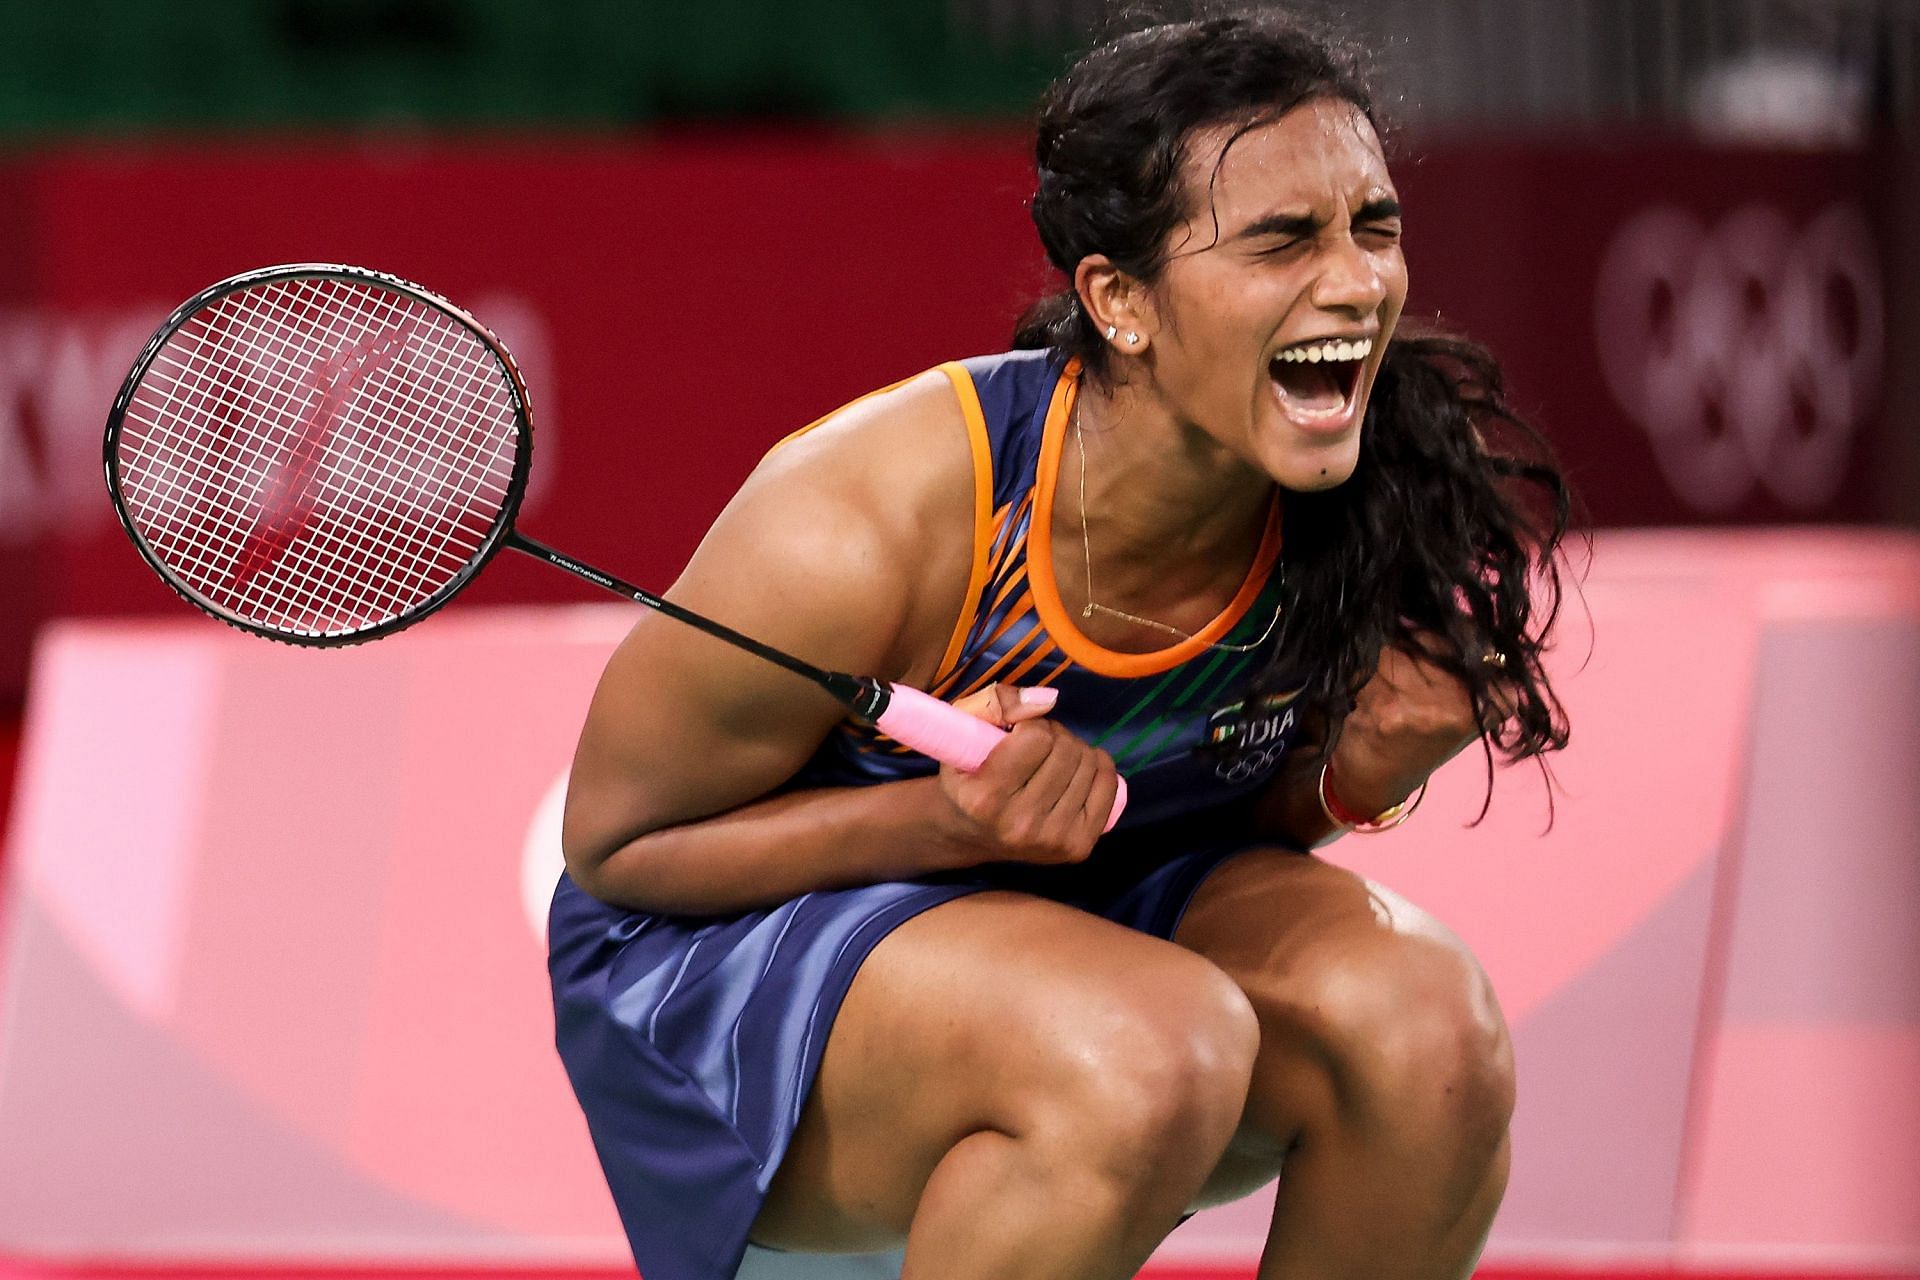 Indonesia Open 2021, PV Sindhu vs Yvonne Li Where to watch, TV schedule, live stream details, and more